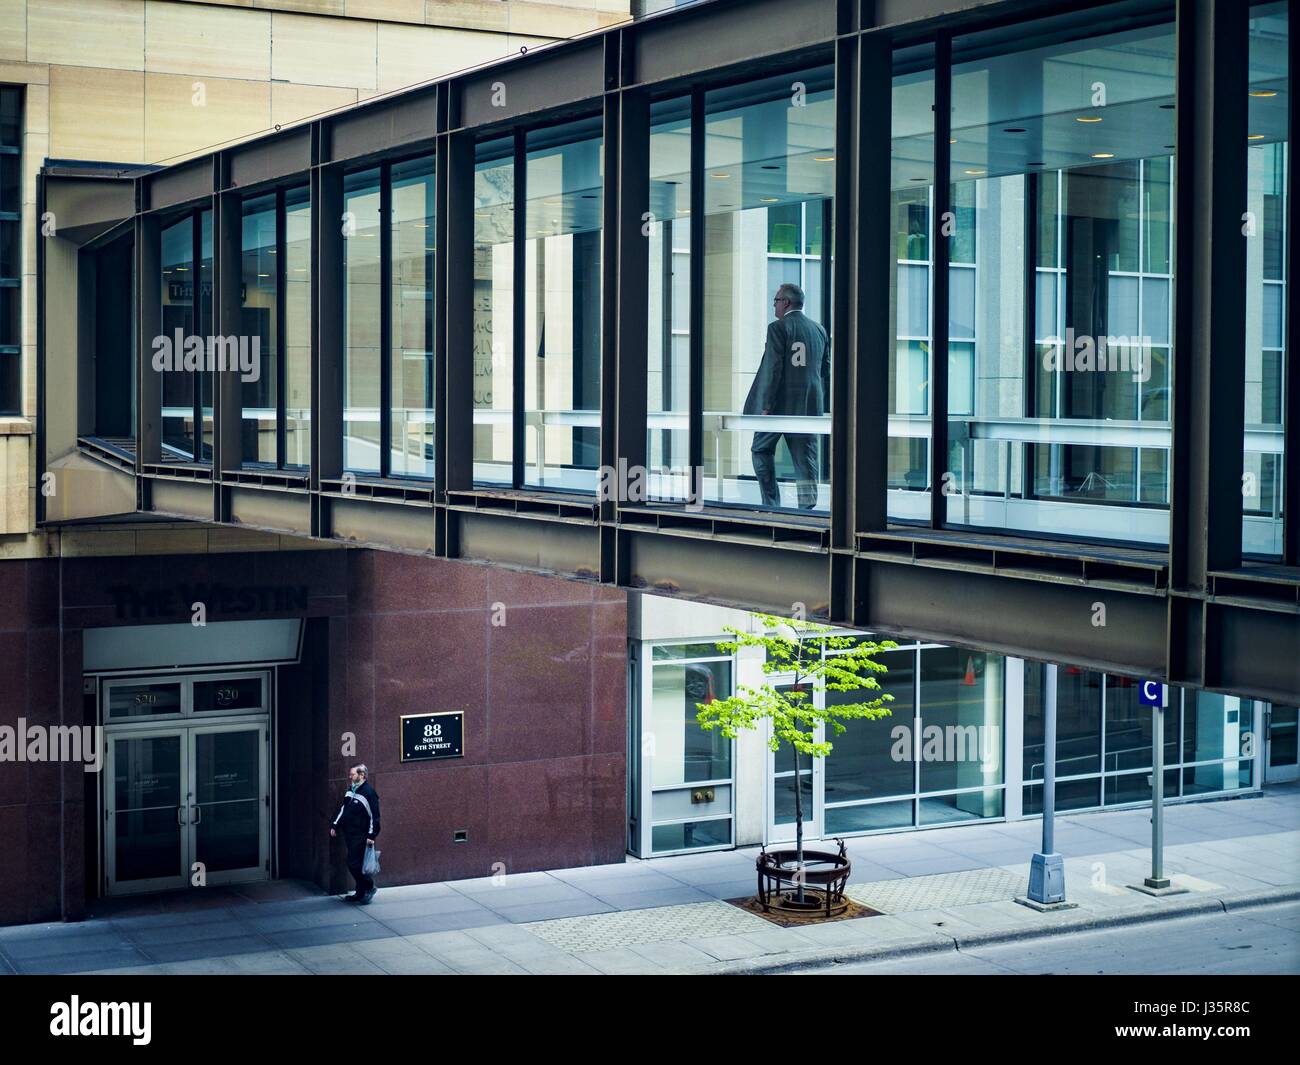 May 3, 2017 - Minneapolis, Minnesota, U.S - The skyway going into the Soo Line Building, a historic building renovated into upscale apartments. The skyways are enclosed pedestrian overpasses that connect downtown buildings. The Minneapolis Skyway was started in the early 1960s as a response to covered shopping malls in the suburbs that were drawing shoppers out of the downtown area. The system grew sporadically until 1974, when the construction of the IDS Center and its center atrium, called the Crystal Court, served as a hub for the downtown skyway system. There are 8 miles of skyways, connec Stock Photo